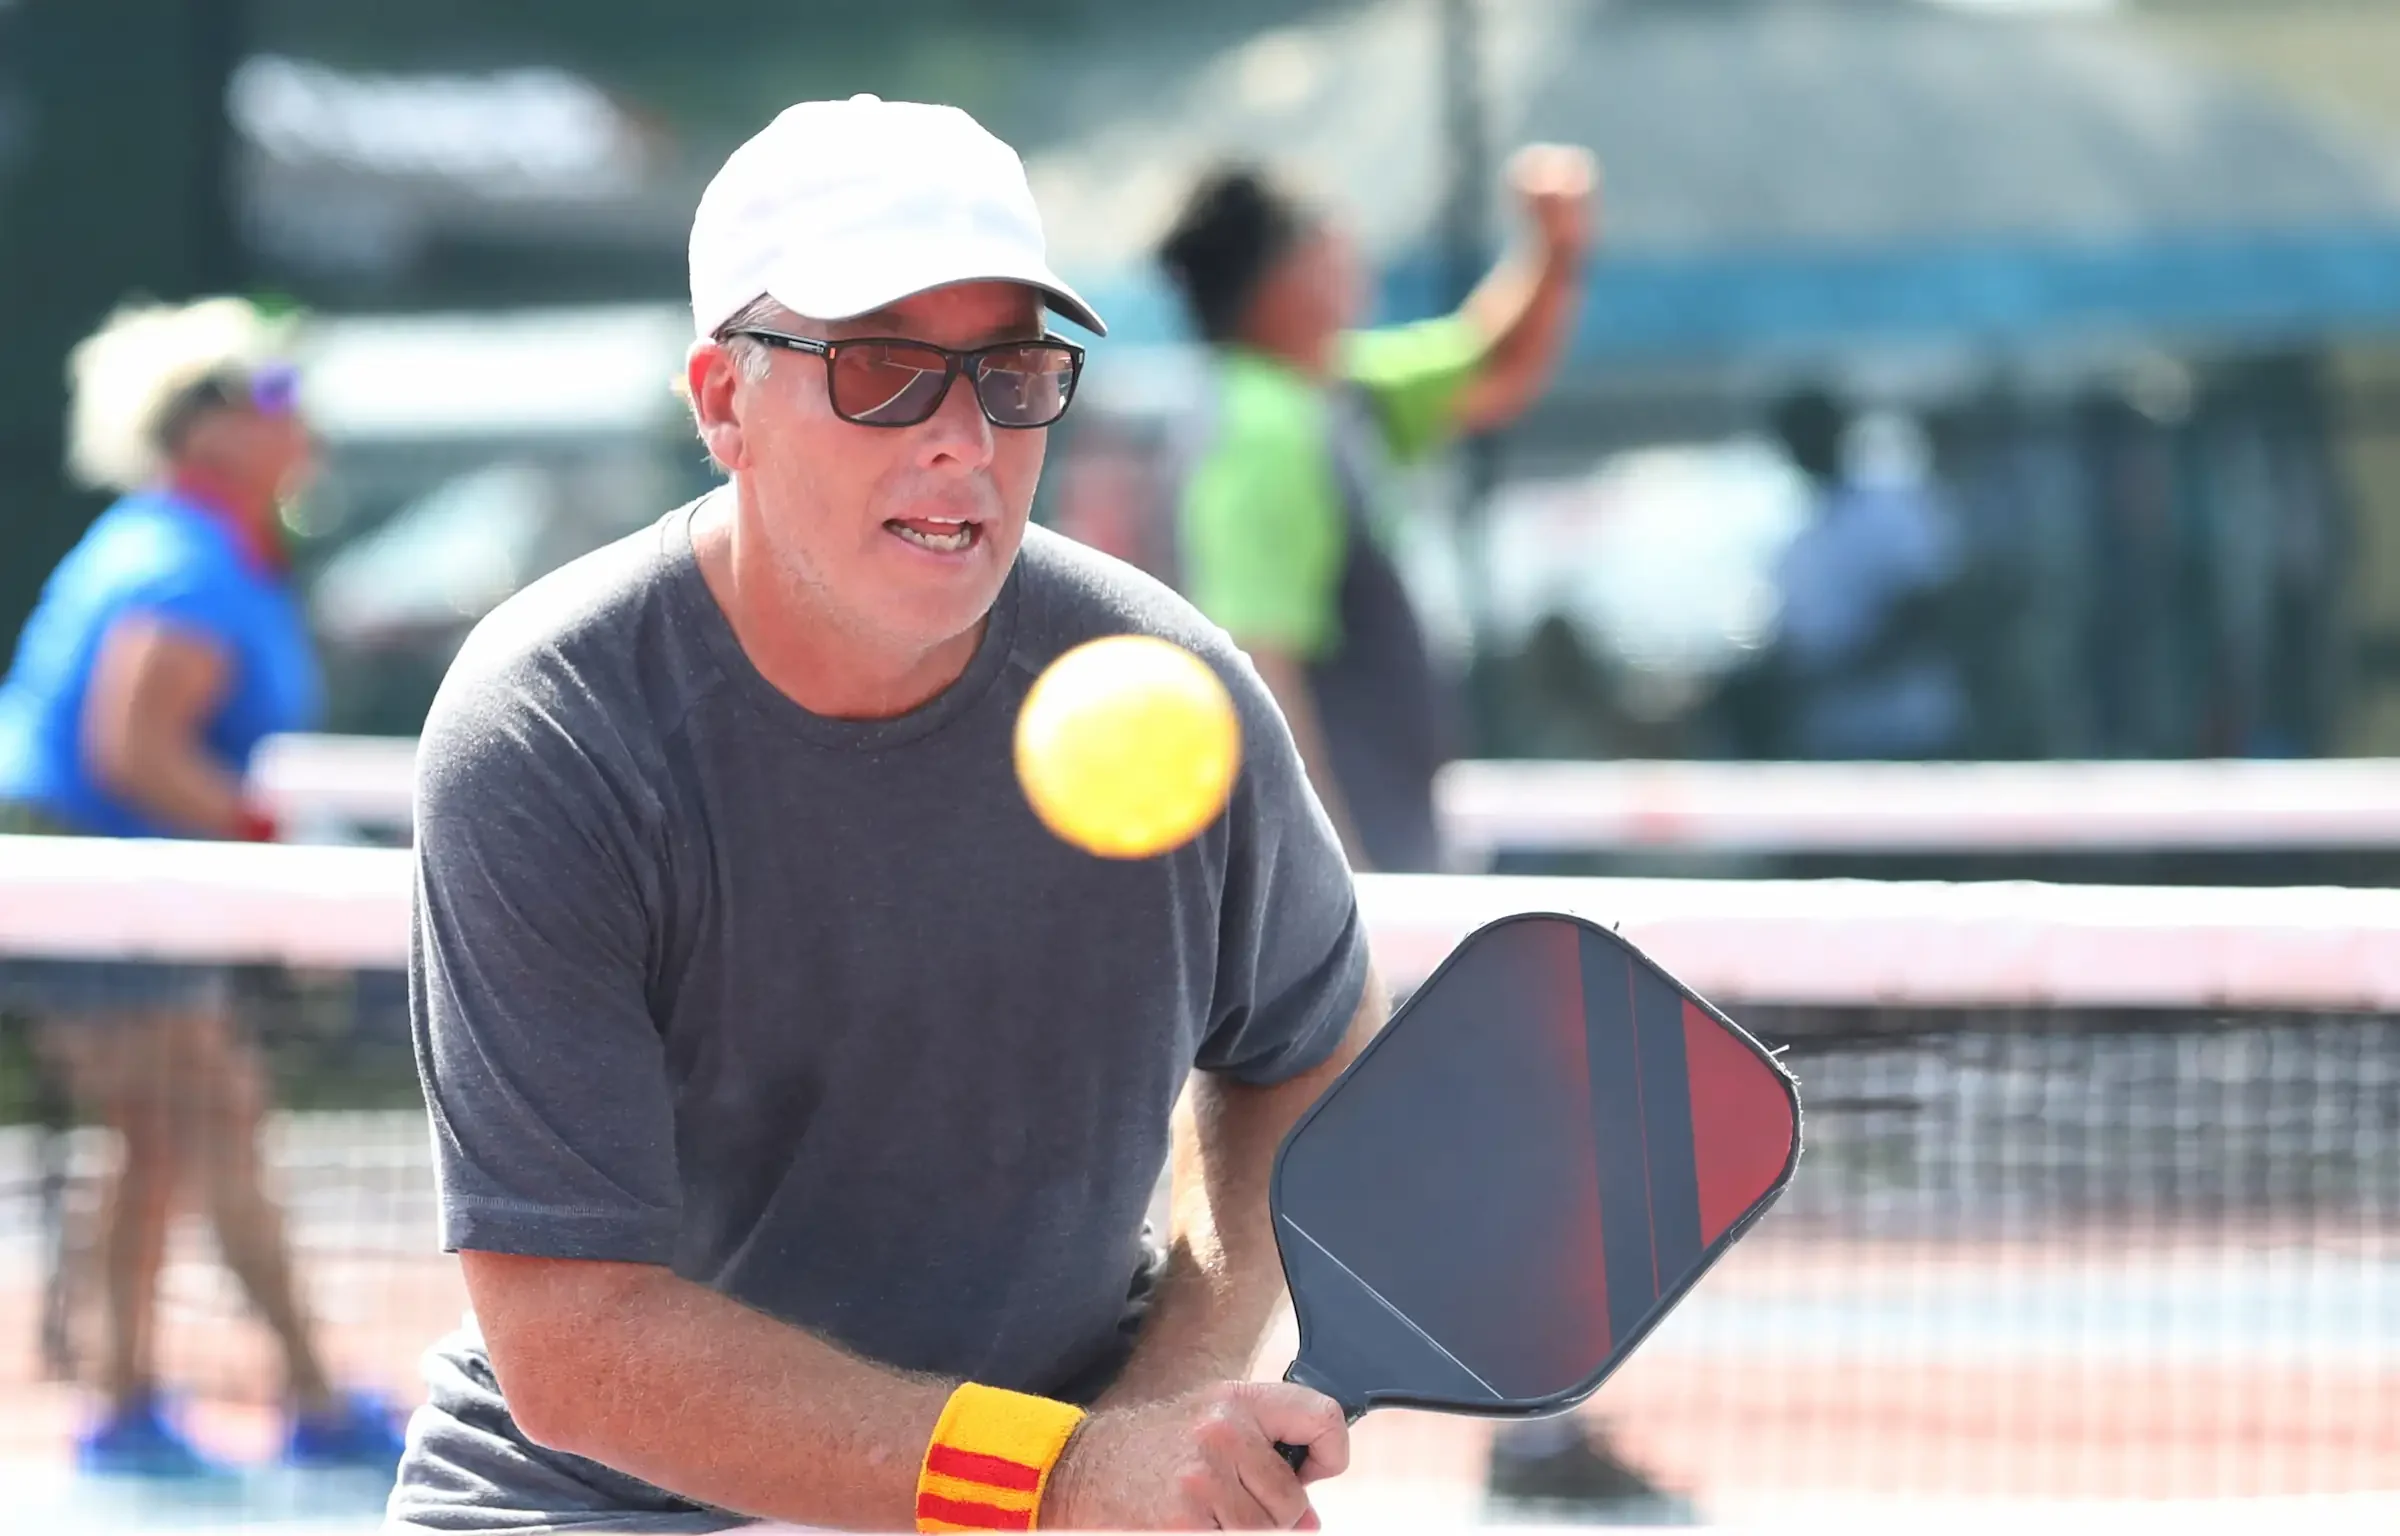 Middle-aged man playing a pickleball tournament